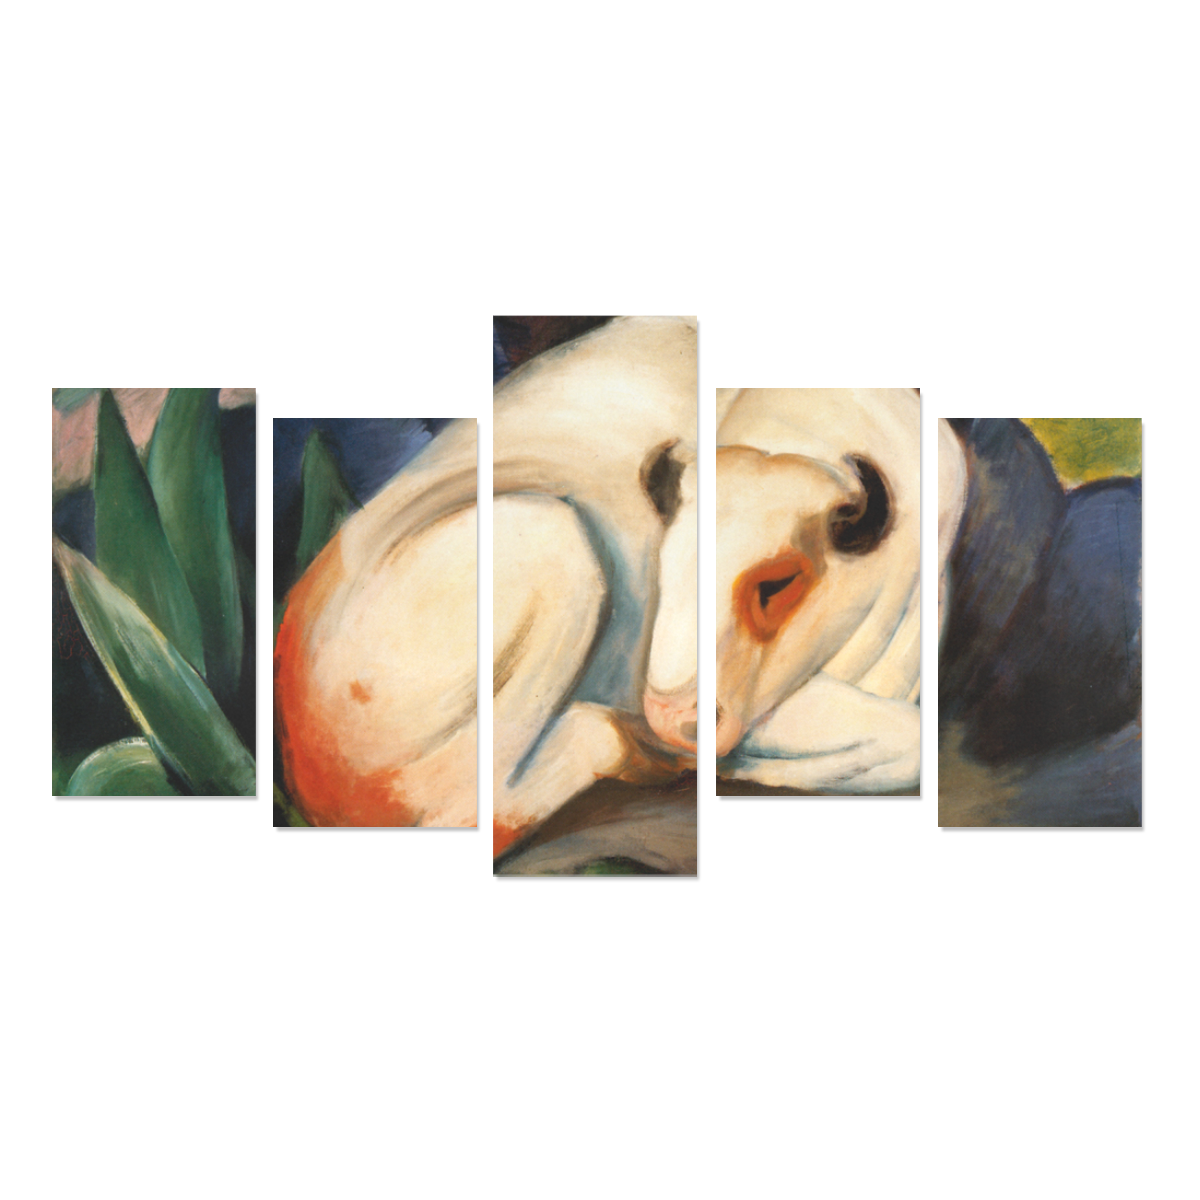 The Bull by Franz Marc Canvas Print Sets E (No Frame)